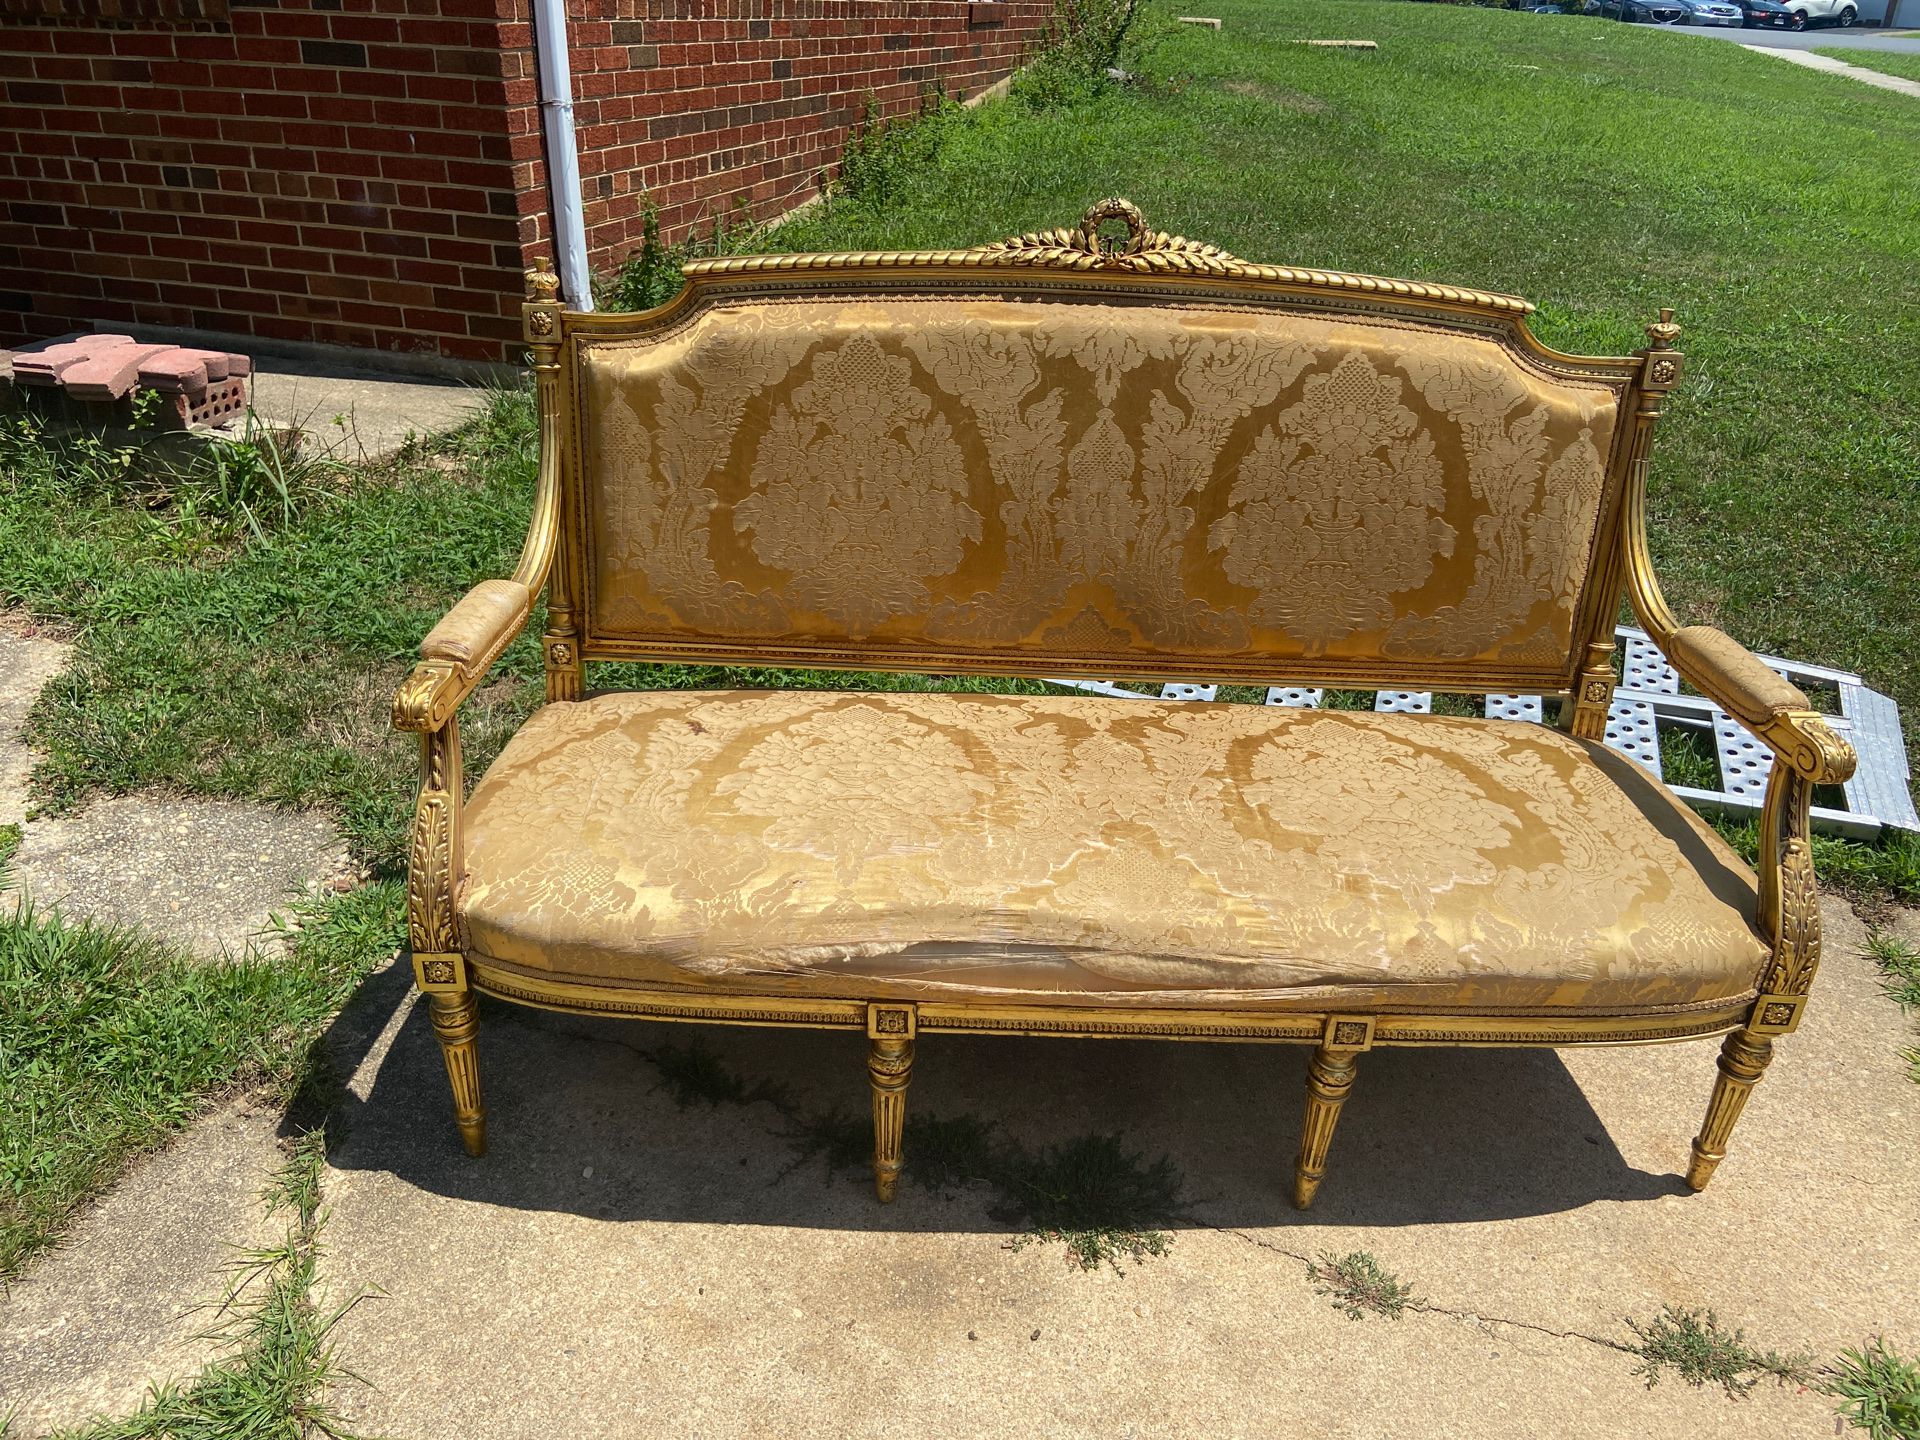 It’s antique, the furniture in the front needs to be fixed and whatever price you want it I can give it to you